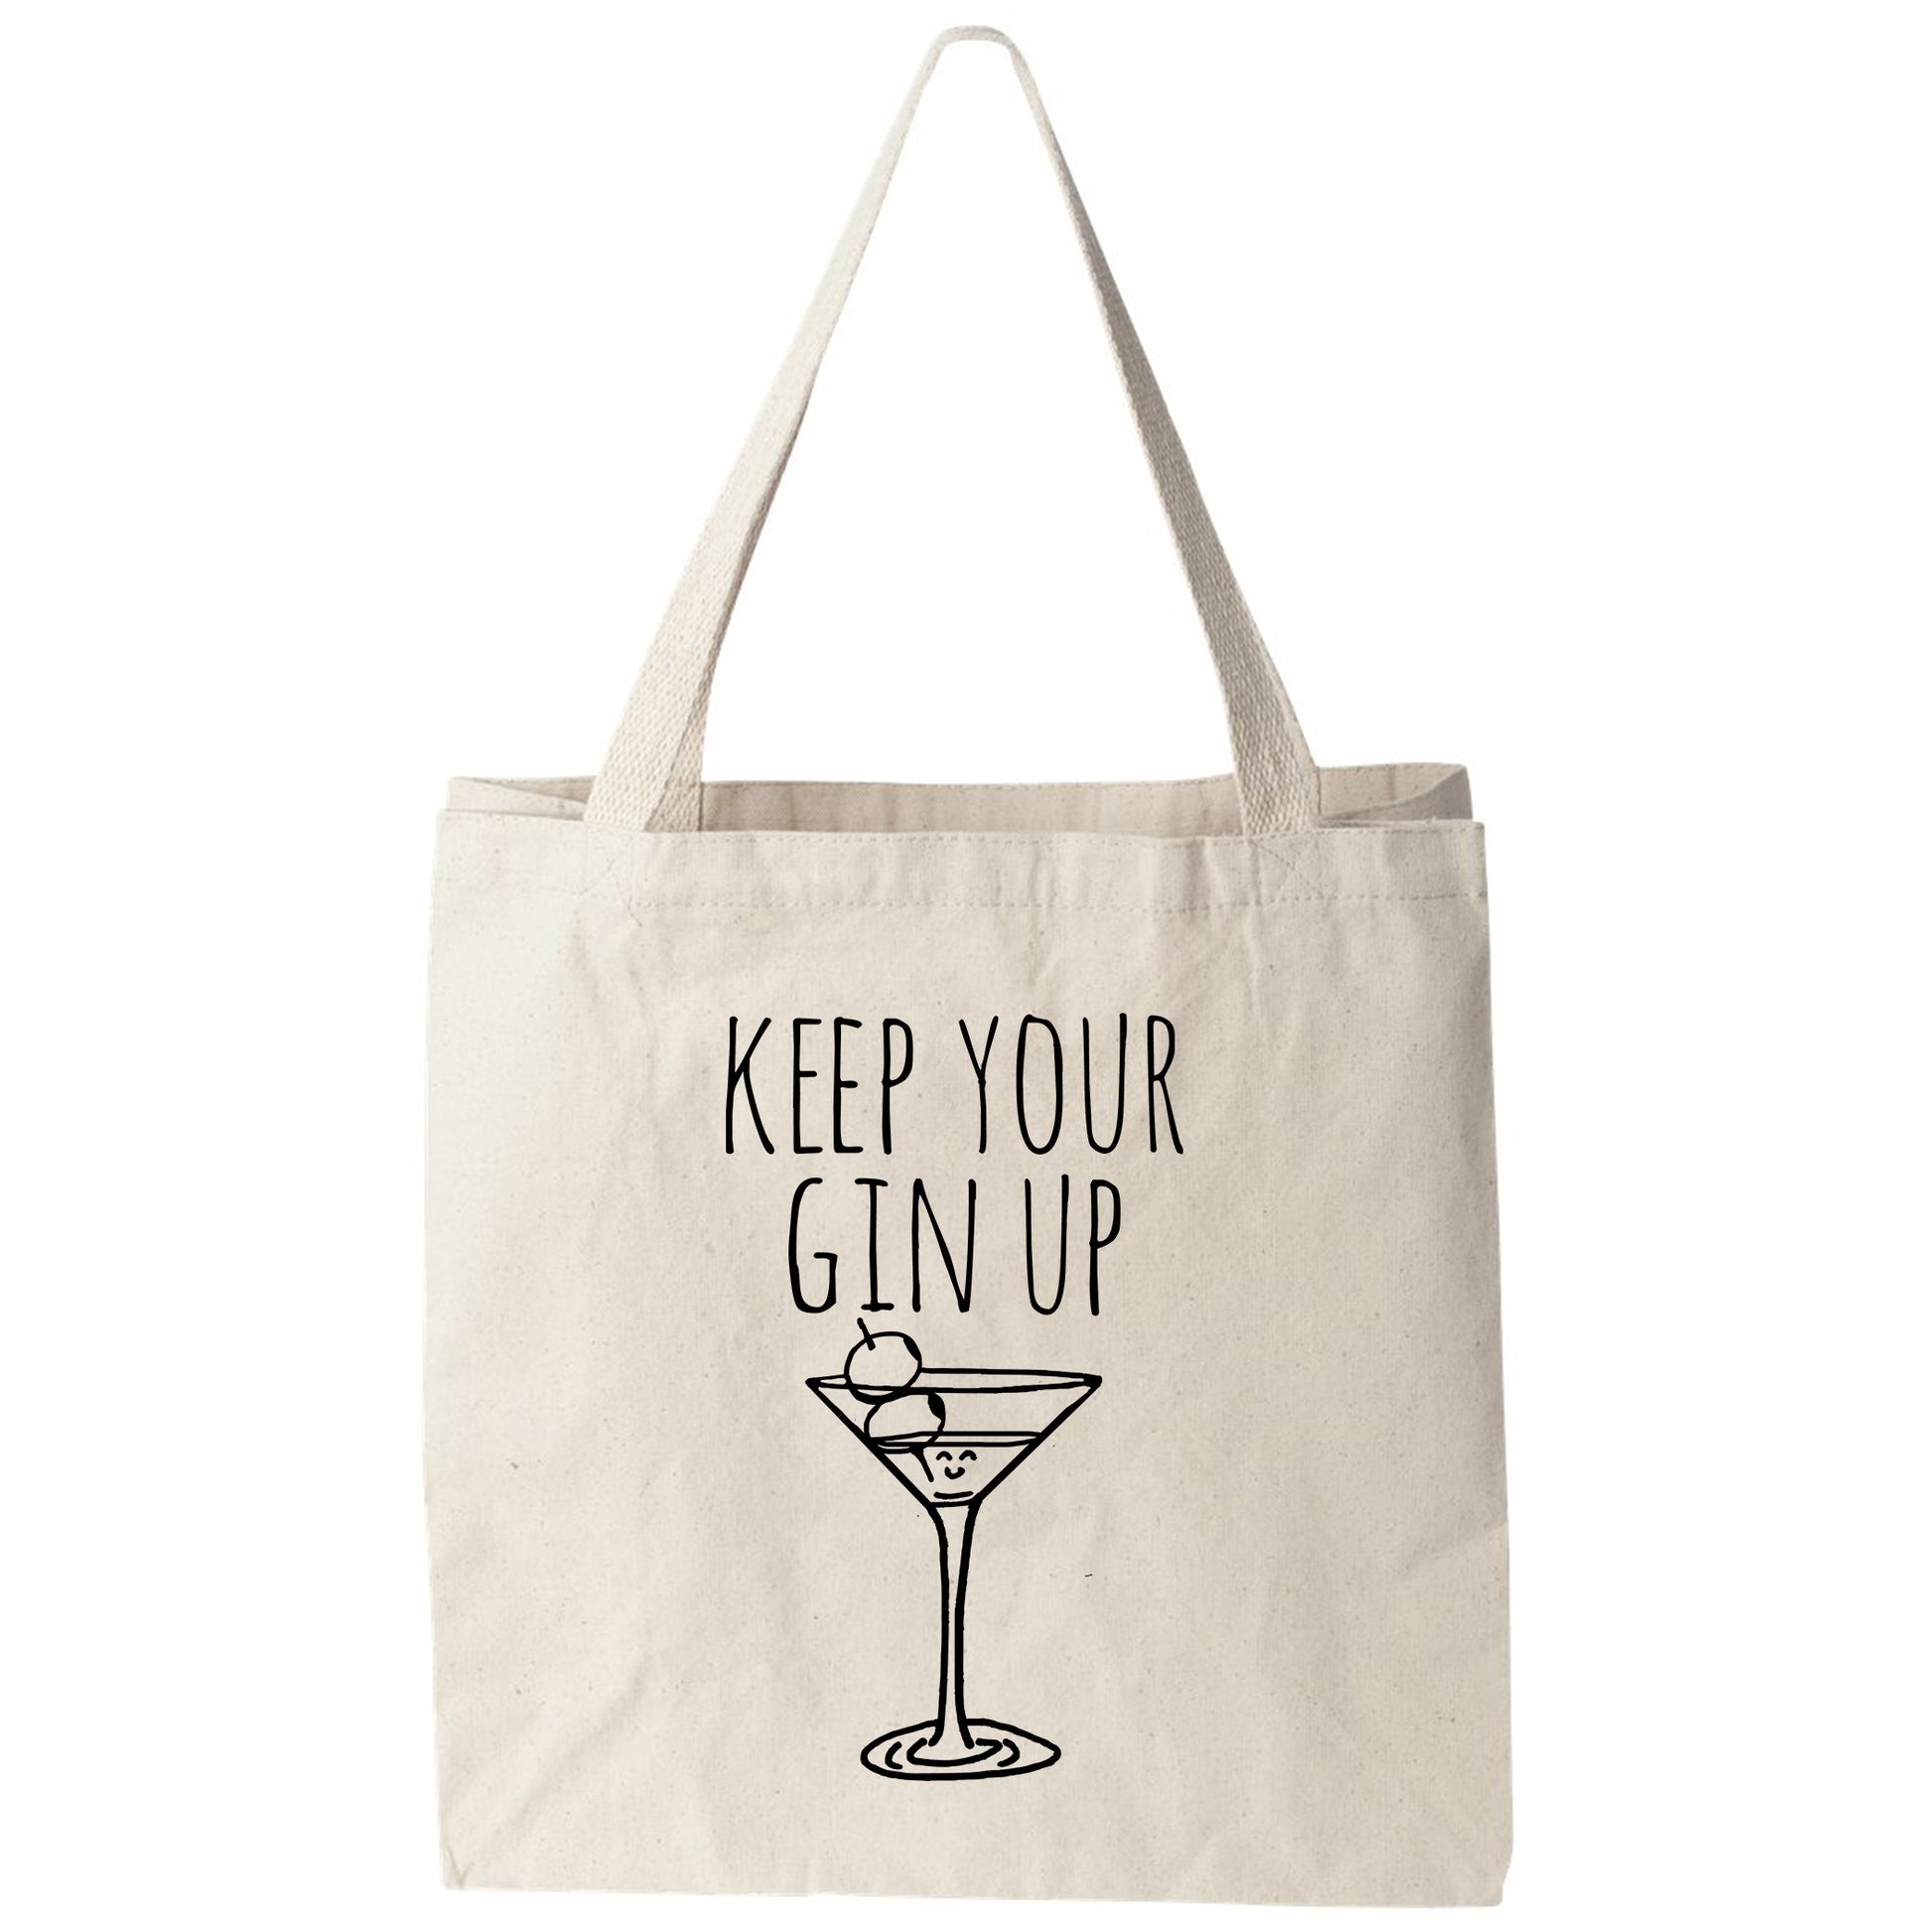 a tote bag that says keep your gin up